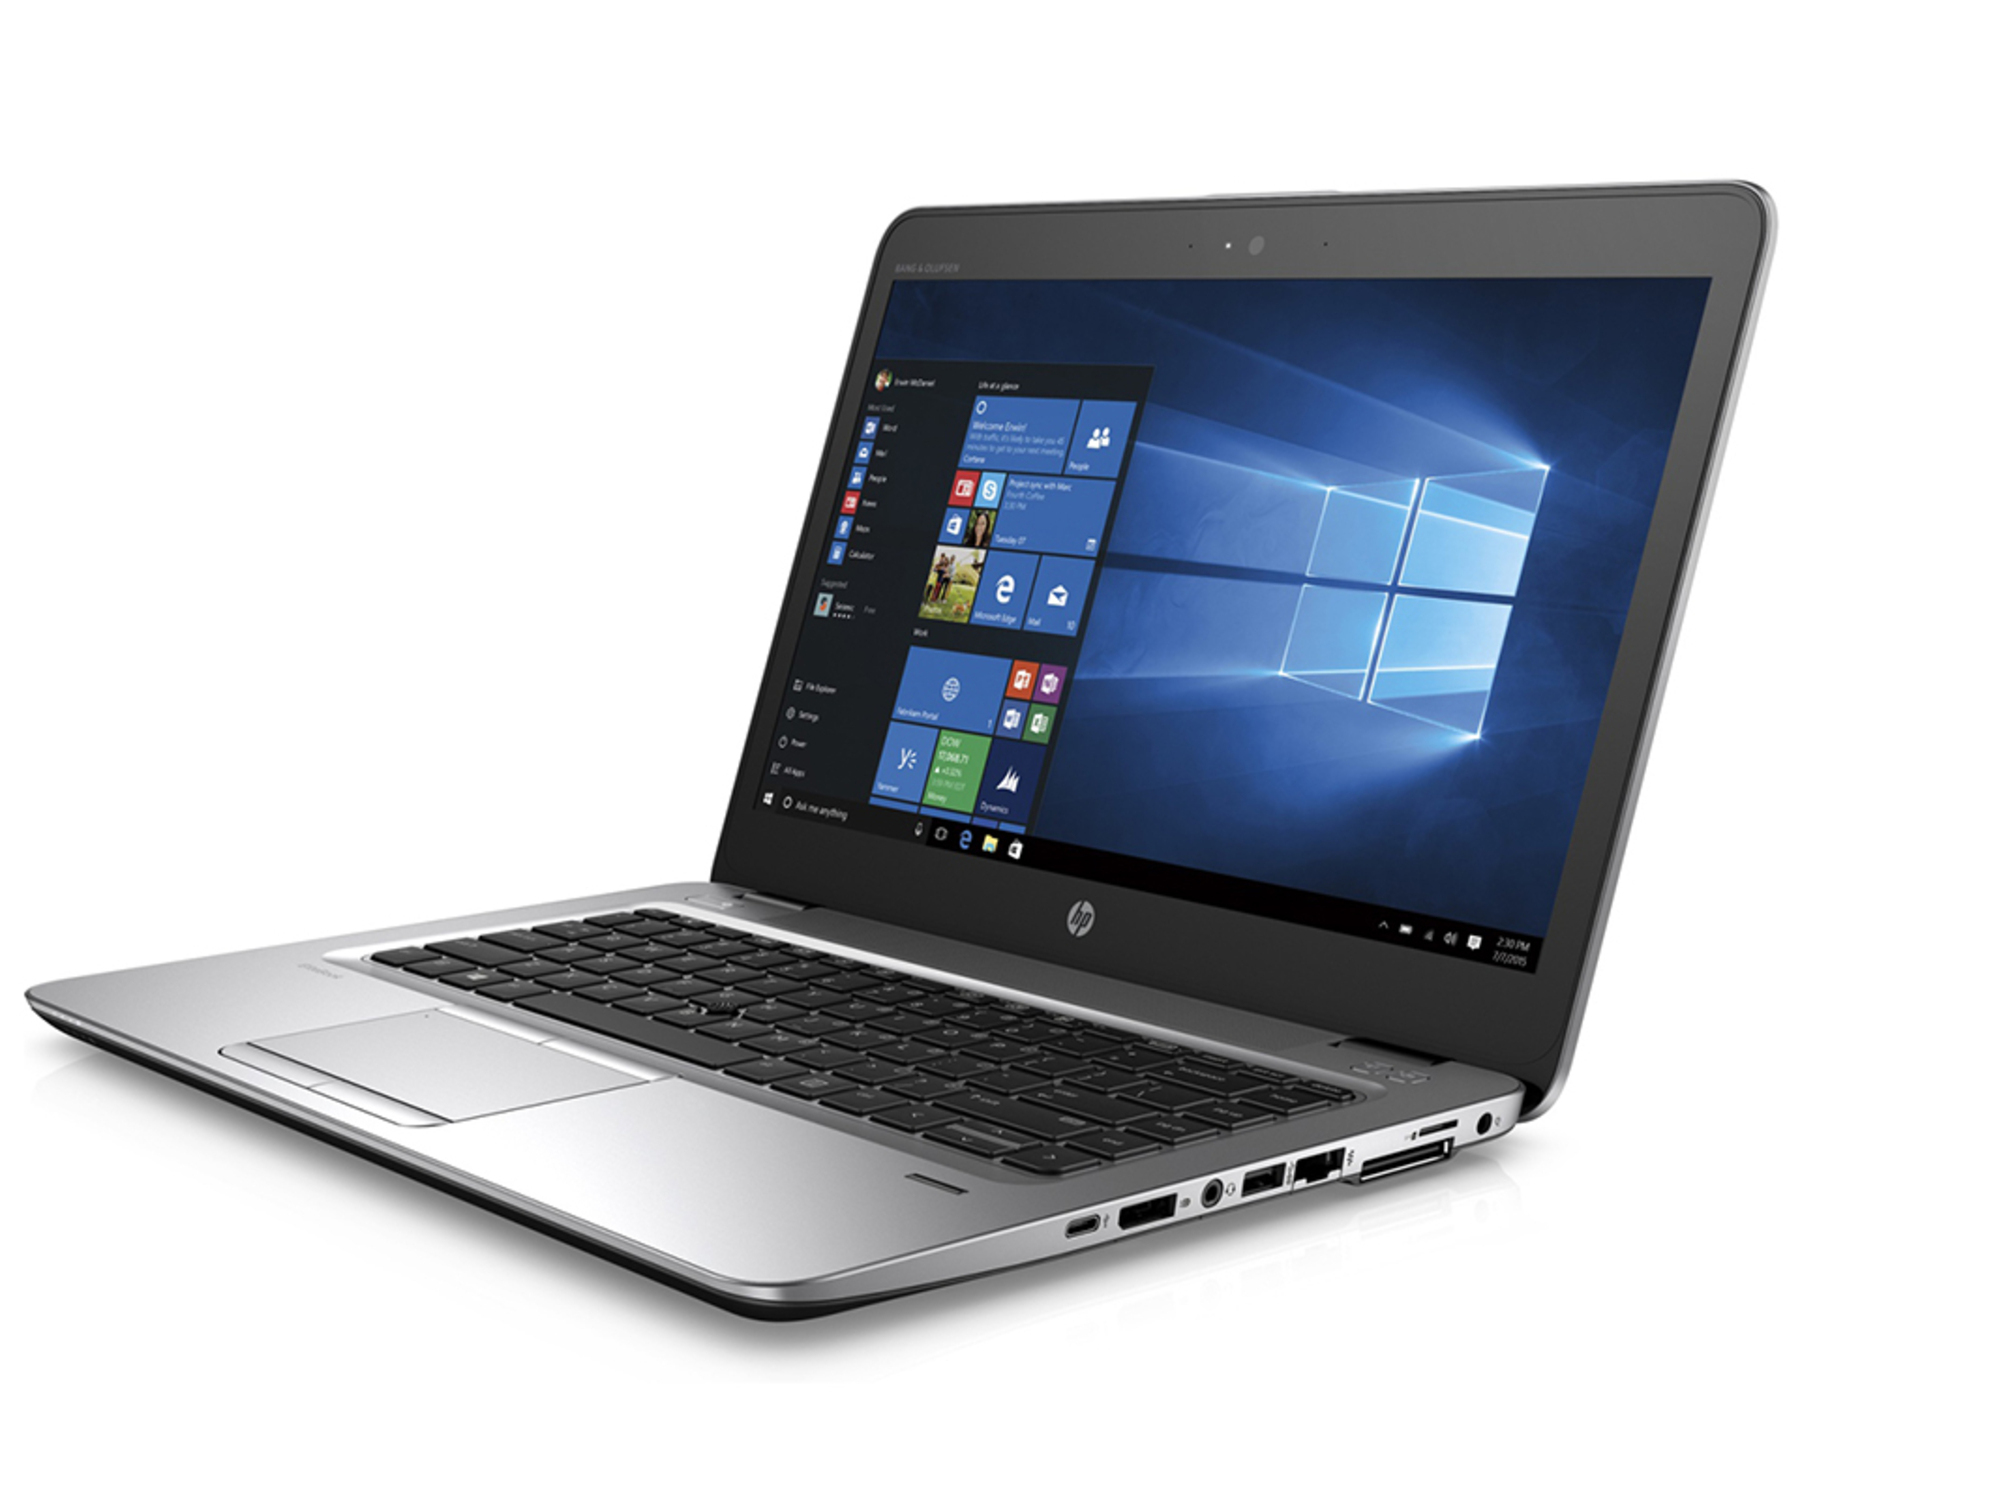 Grab this refurbished HP EliteBook for less than $300 this Cyber Week